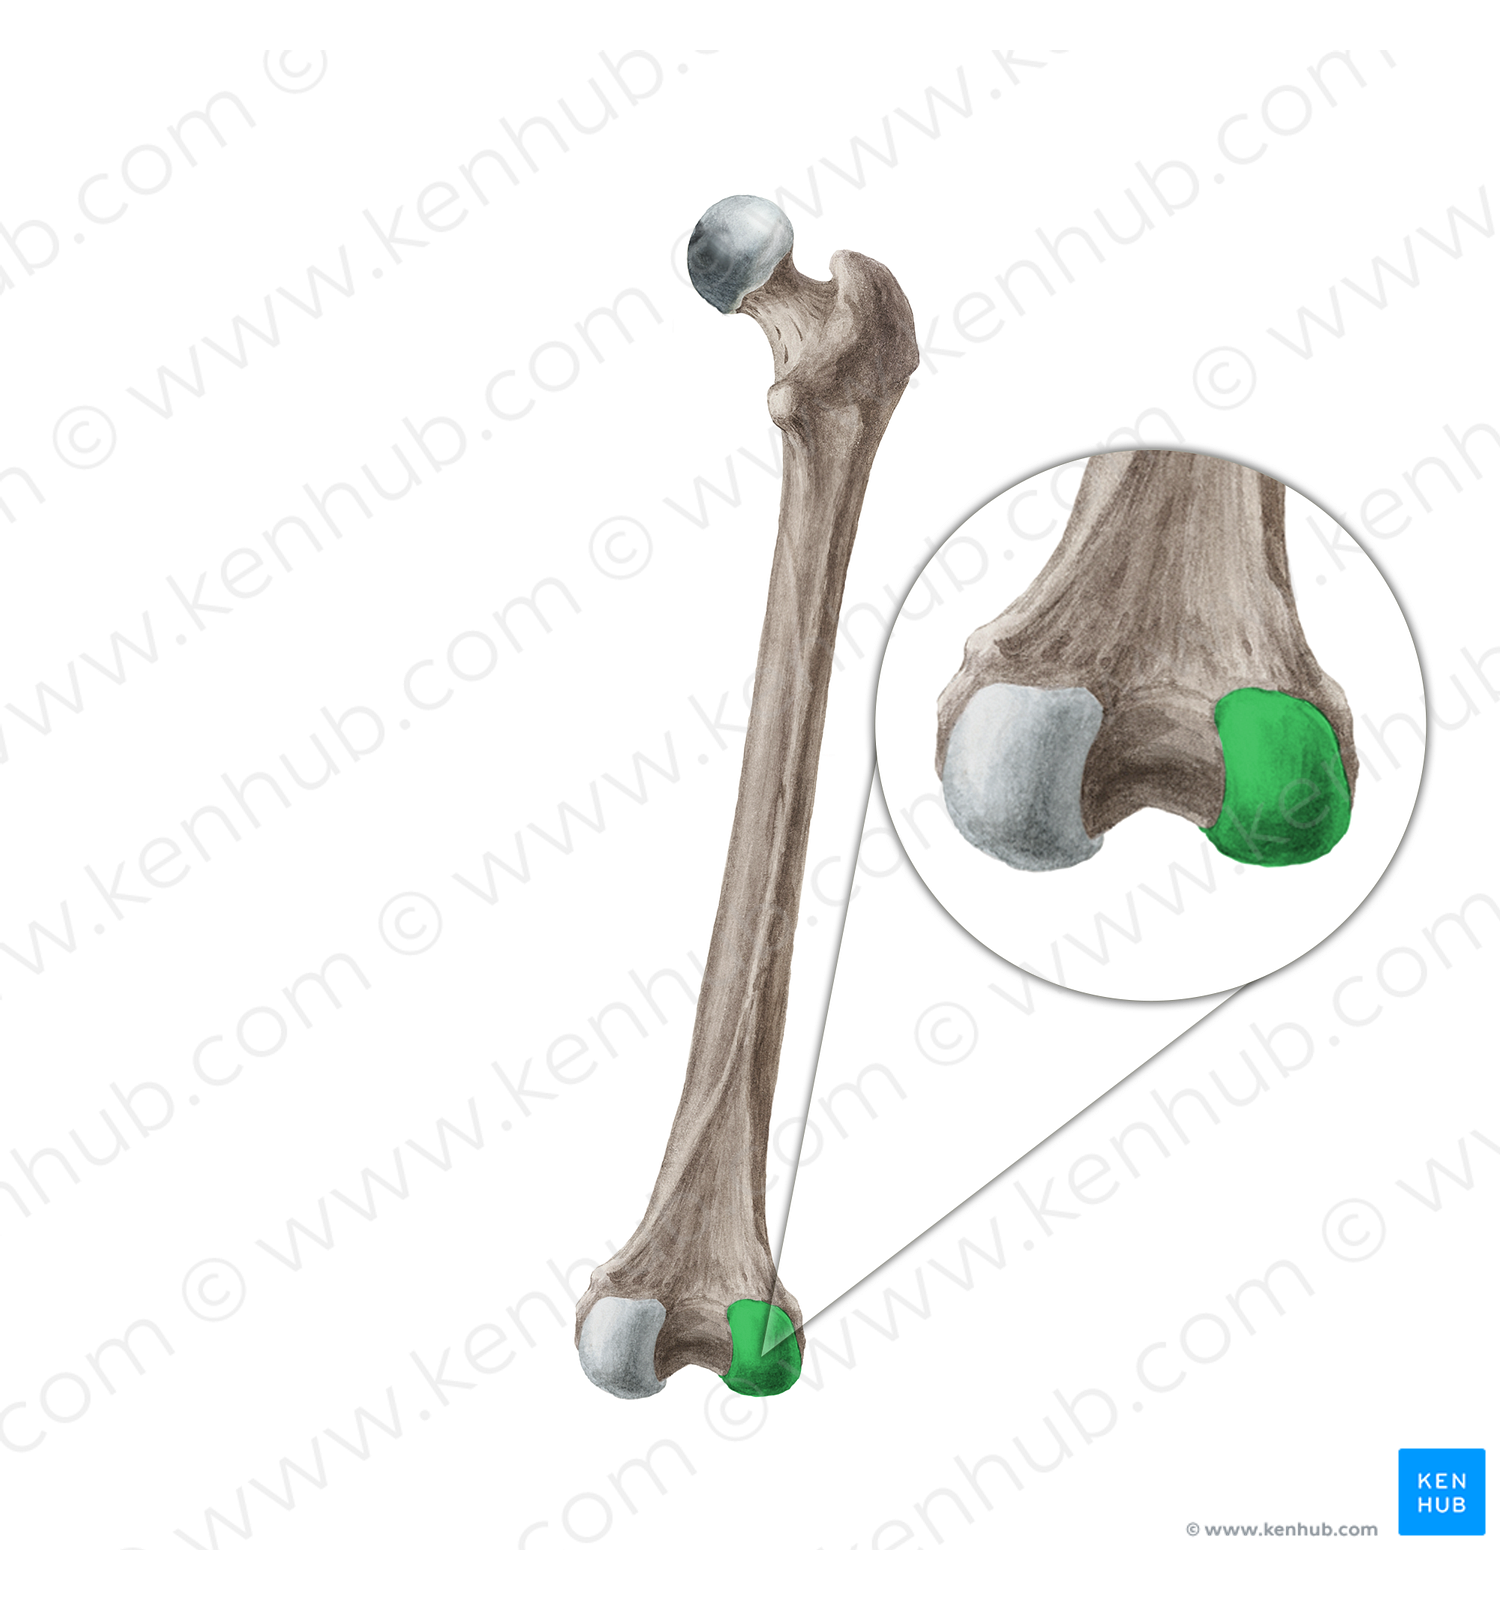 Lateral condyle of femur (#2821)